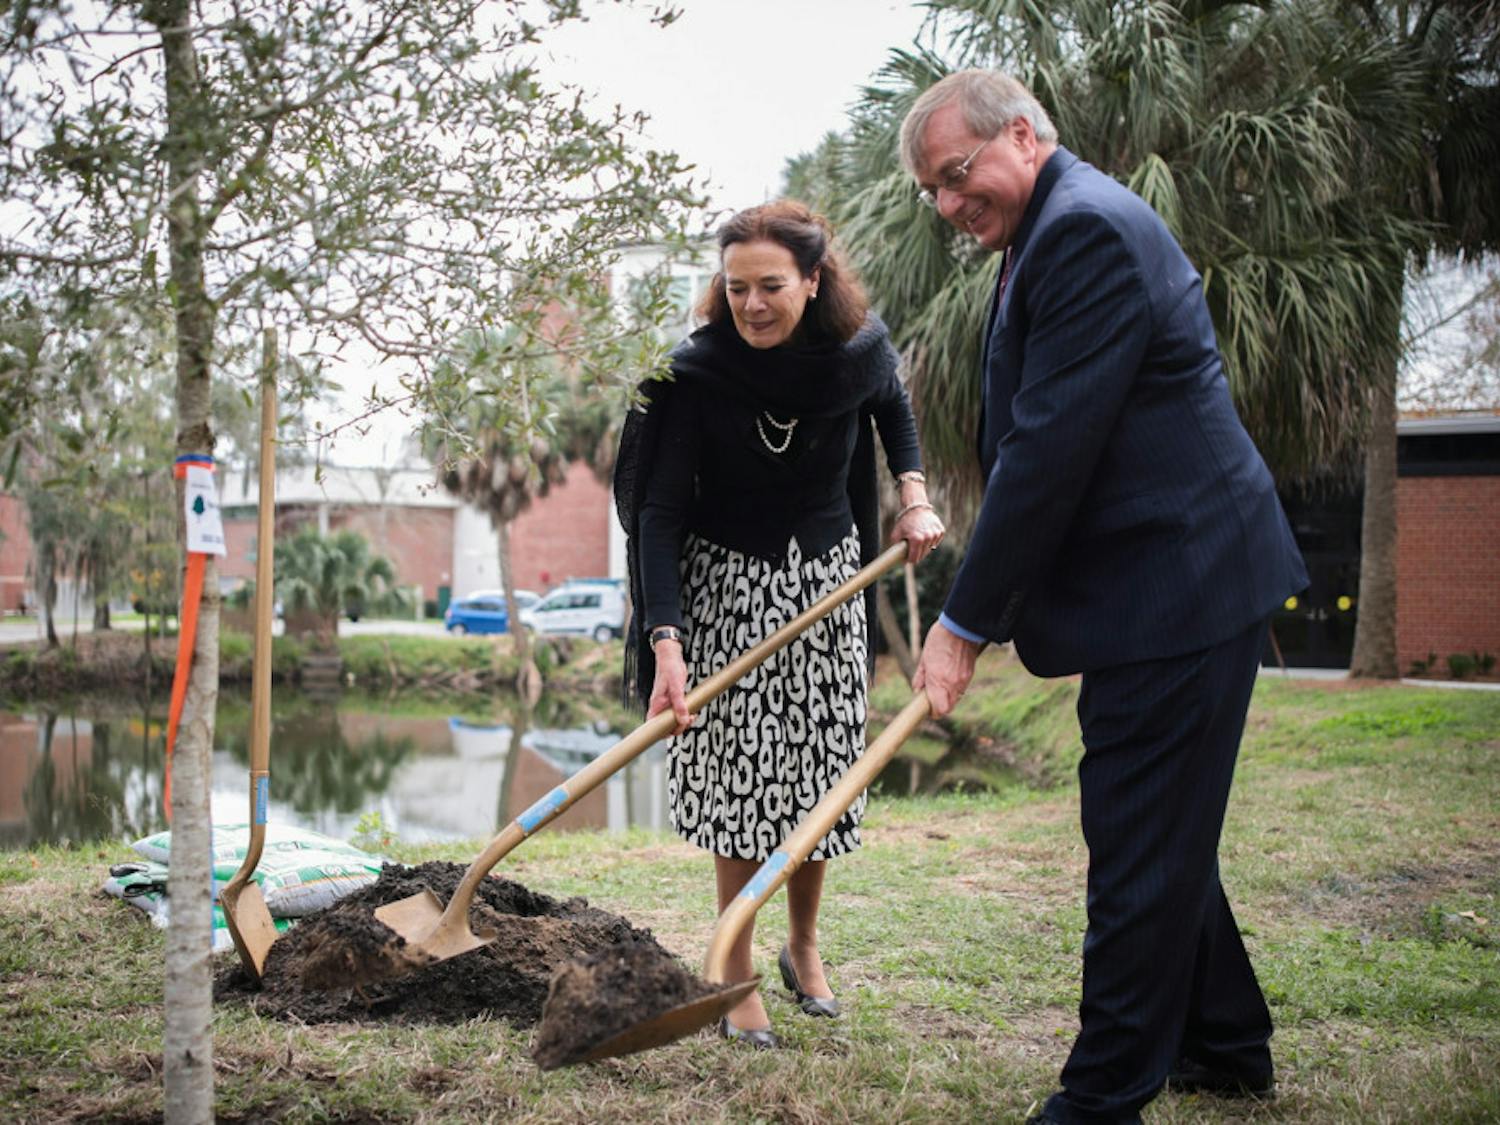 UF President Kent Fuchs and Wageningen University and Research Executive Board President Louise Fresco planted a 9-foot live oak tree Thursday for Florida Arbor Day. This is part of an initiative to plant 100 “UniversiTREEs” across the world.